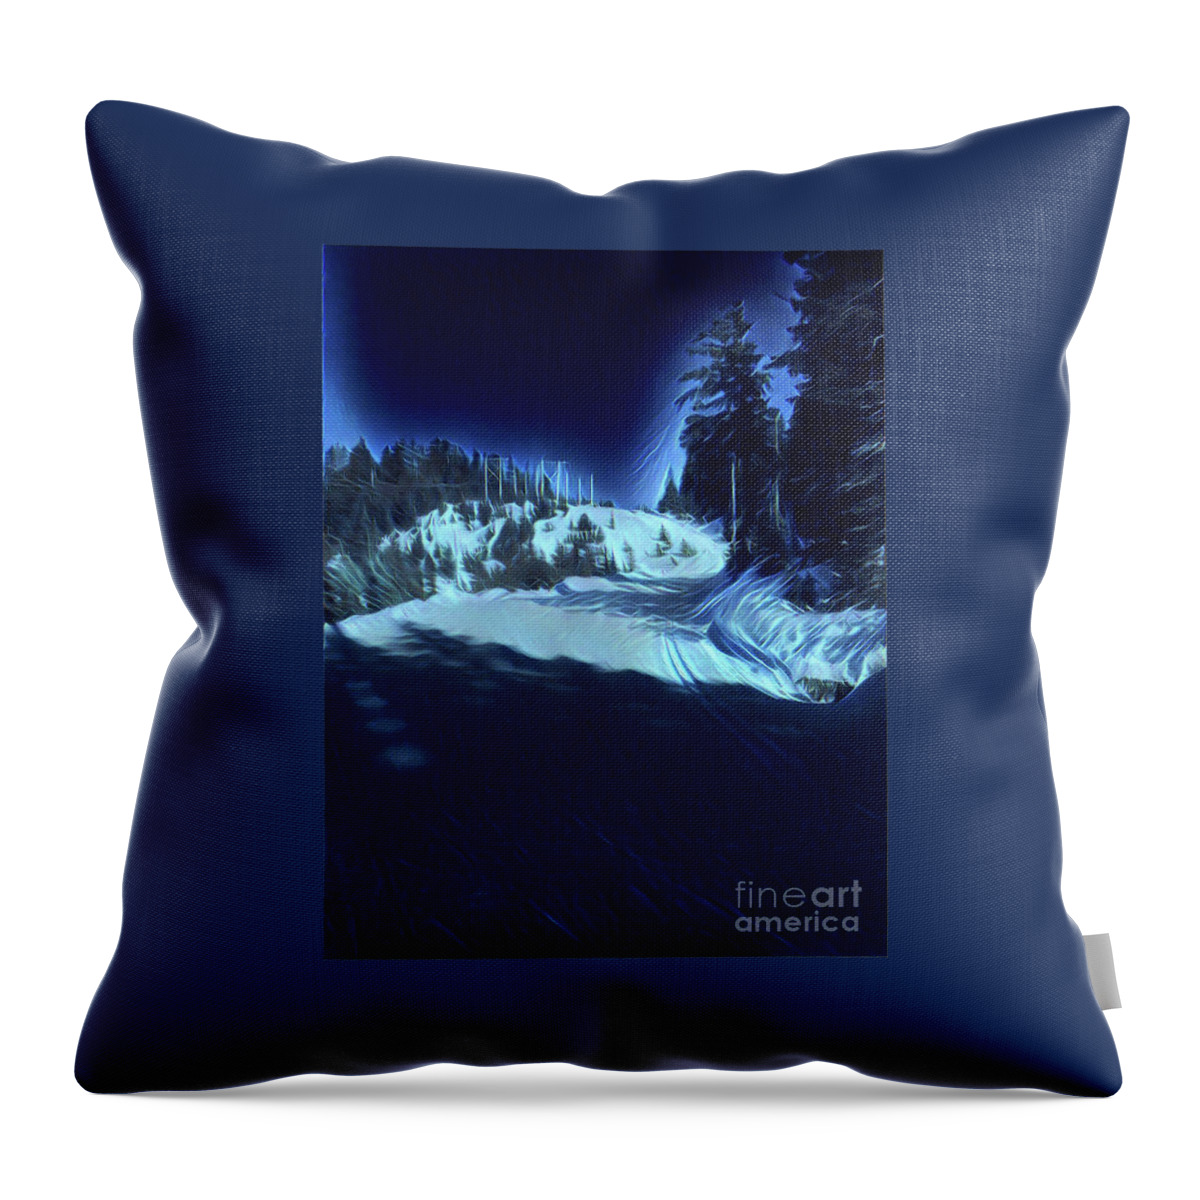 Blue Period Throw Pillow featuring the photograph Cypress Bowl, W. Vancouver, Canada by Bill Thomson